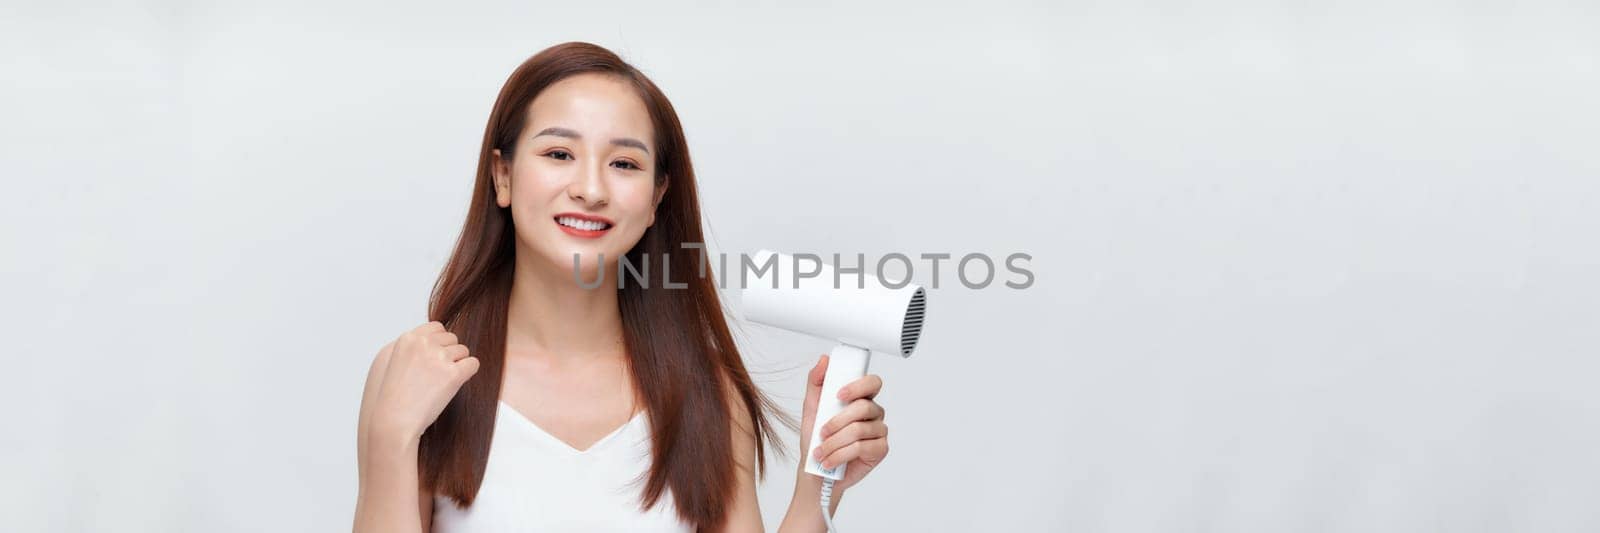 Banner of beautiful smiling girl with long straight hair using hairdryer. 